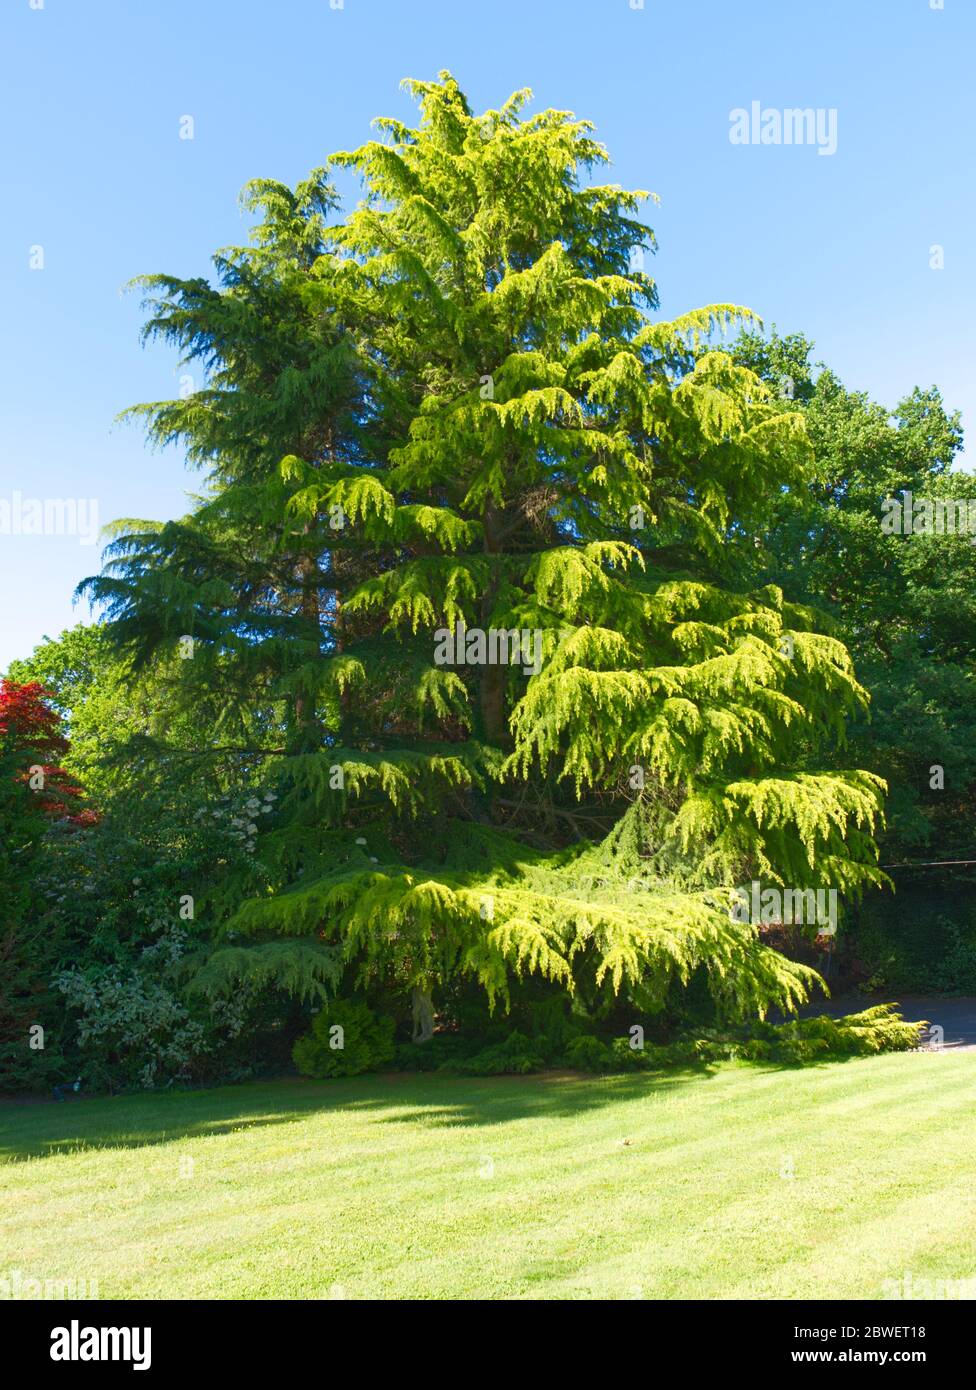 Spectacular Common Hemlock Spruce dominating the grounds of wonderful parkland on a glorious early summer day in England. More easing of lockdown Stock Photo